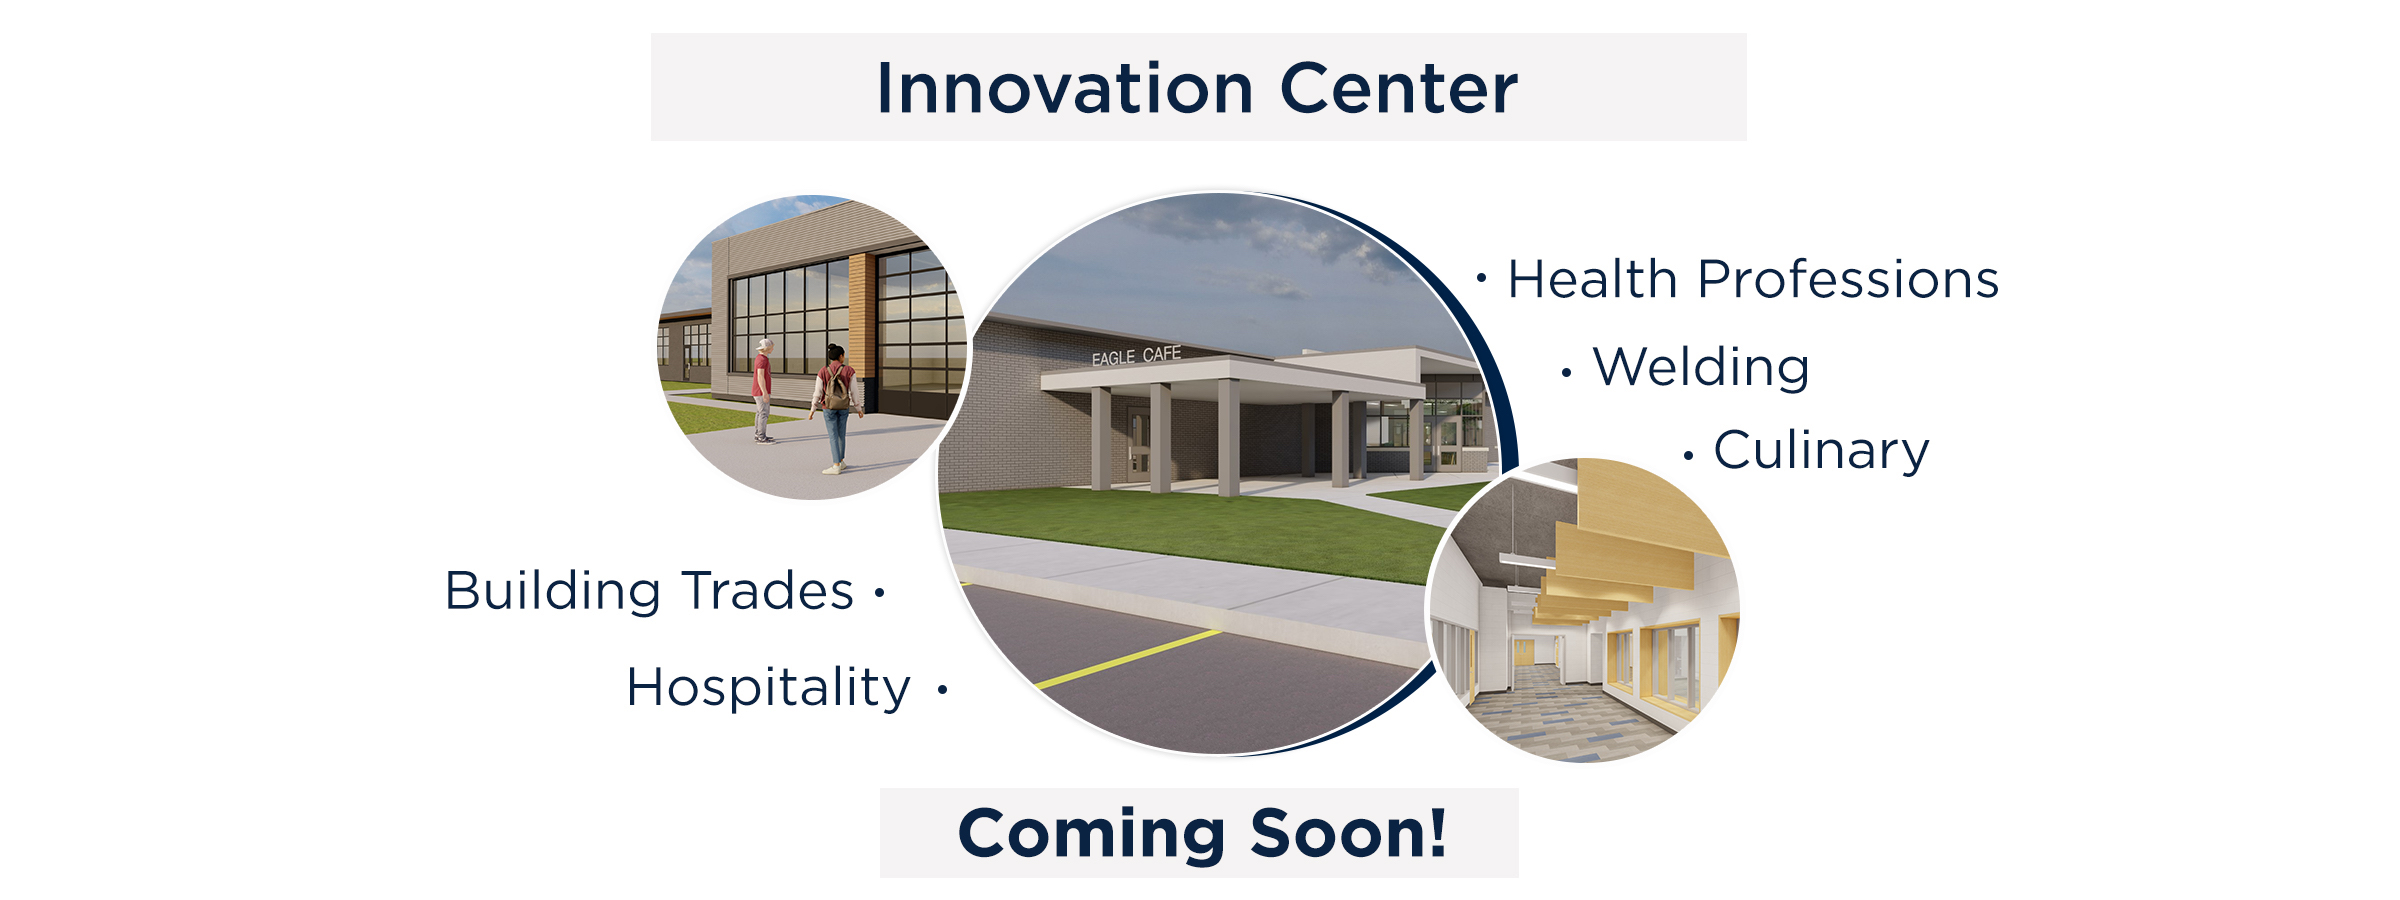 Image showing the Innovation Center campuses, this campuse will have health professions, welding, culimnary, buildinng trades, hospitalytiy, this is coming soon